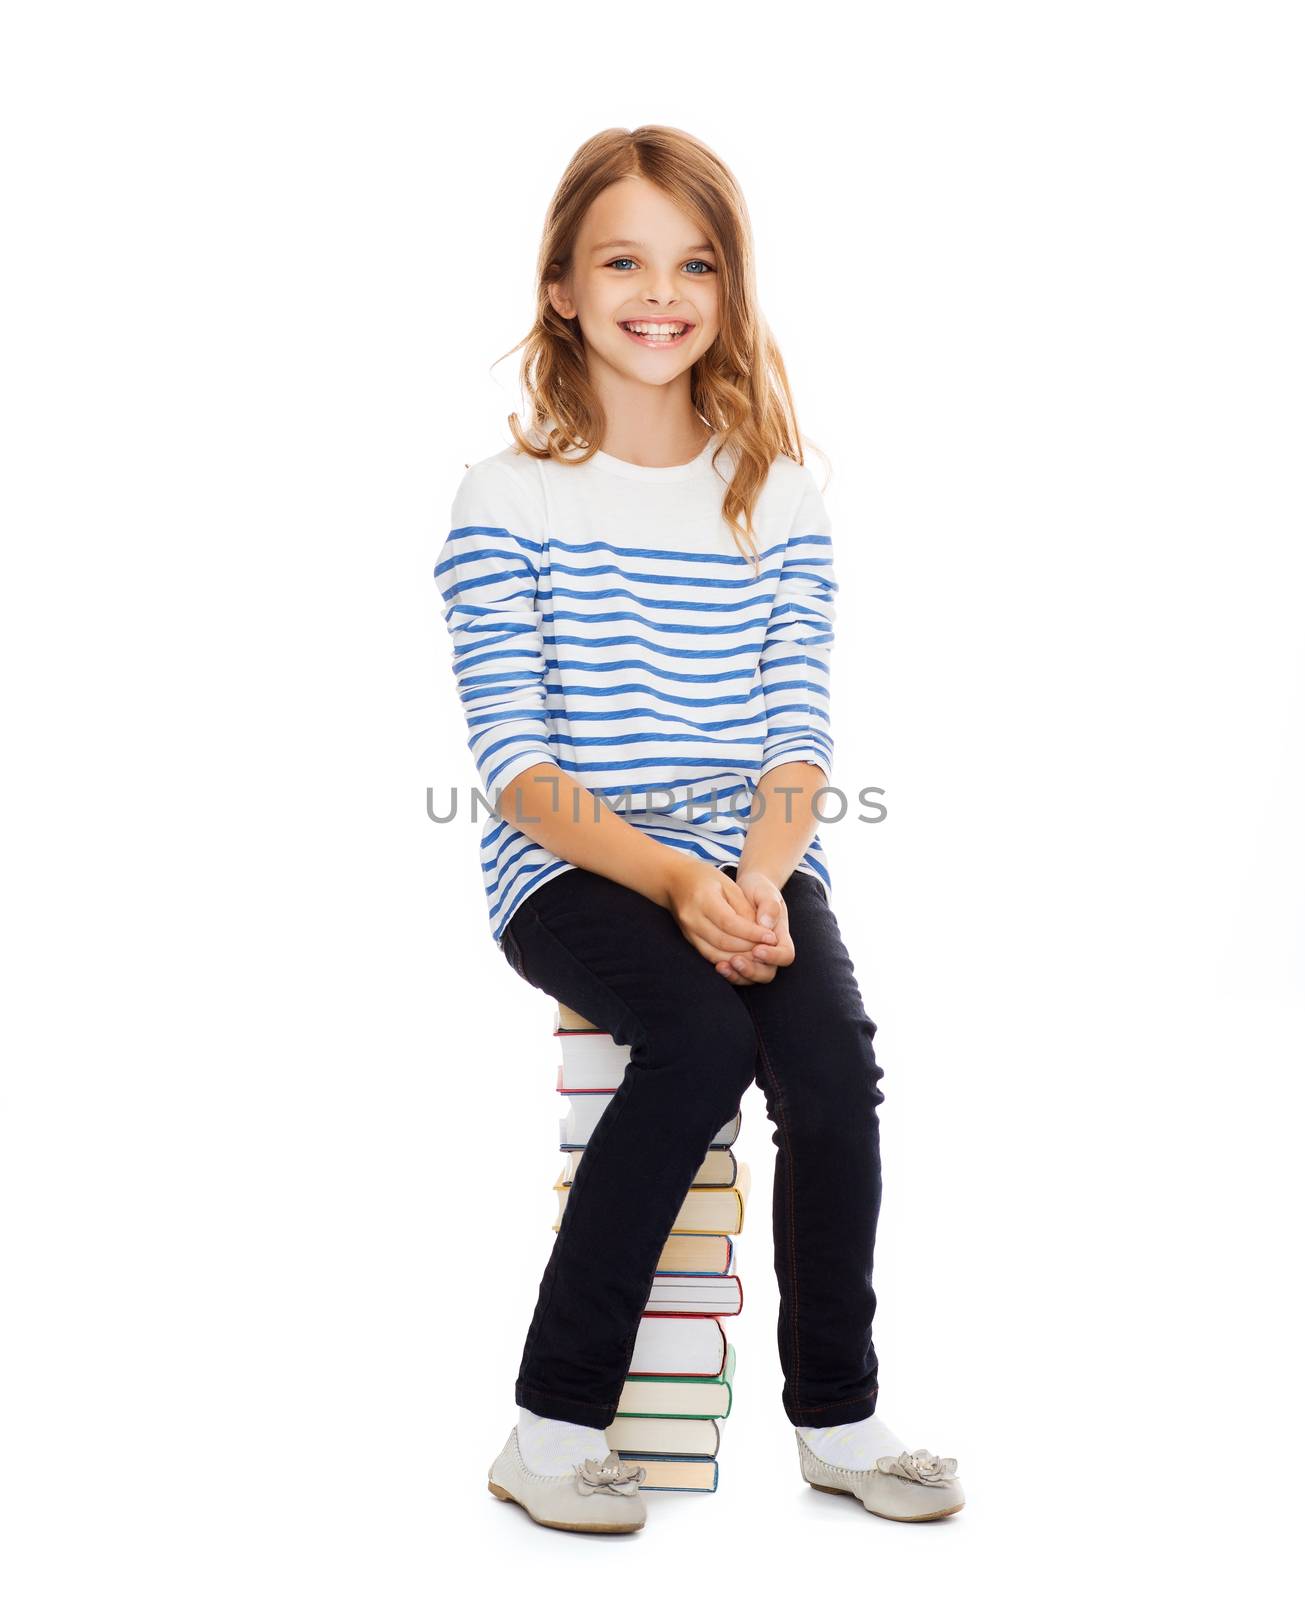 education and school concept - little student girl sitting on stack of books